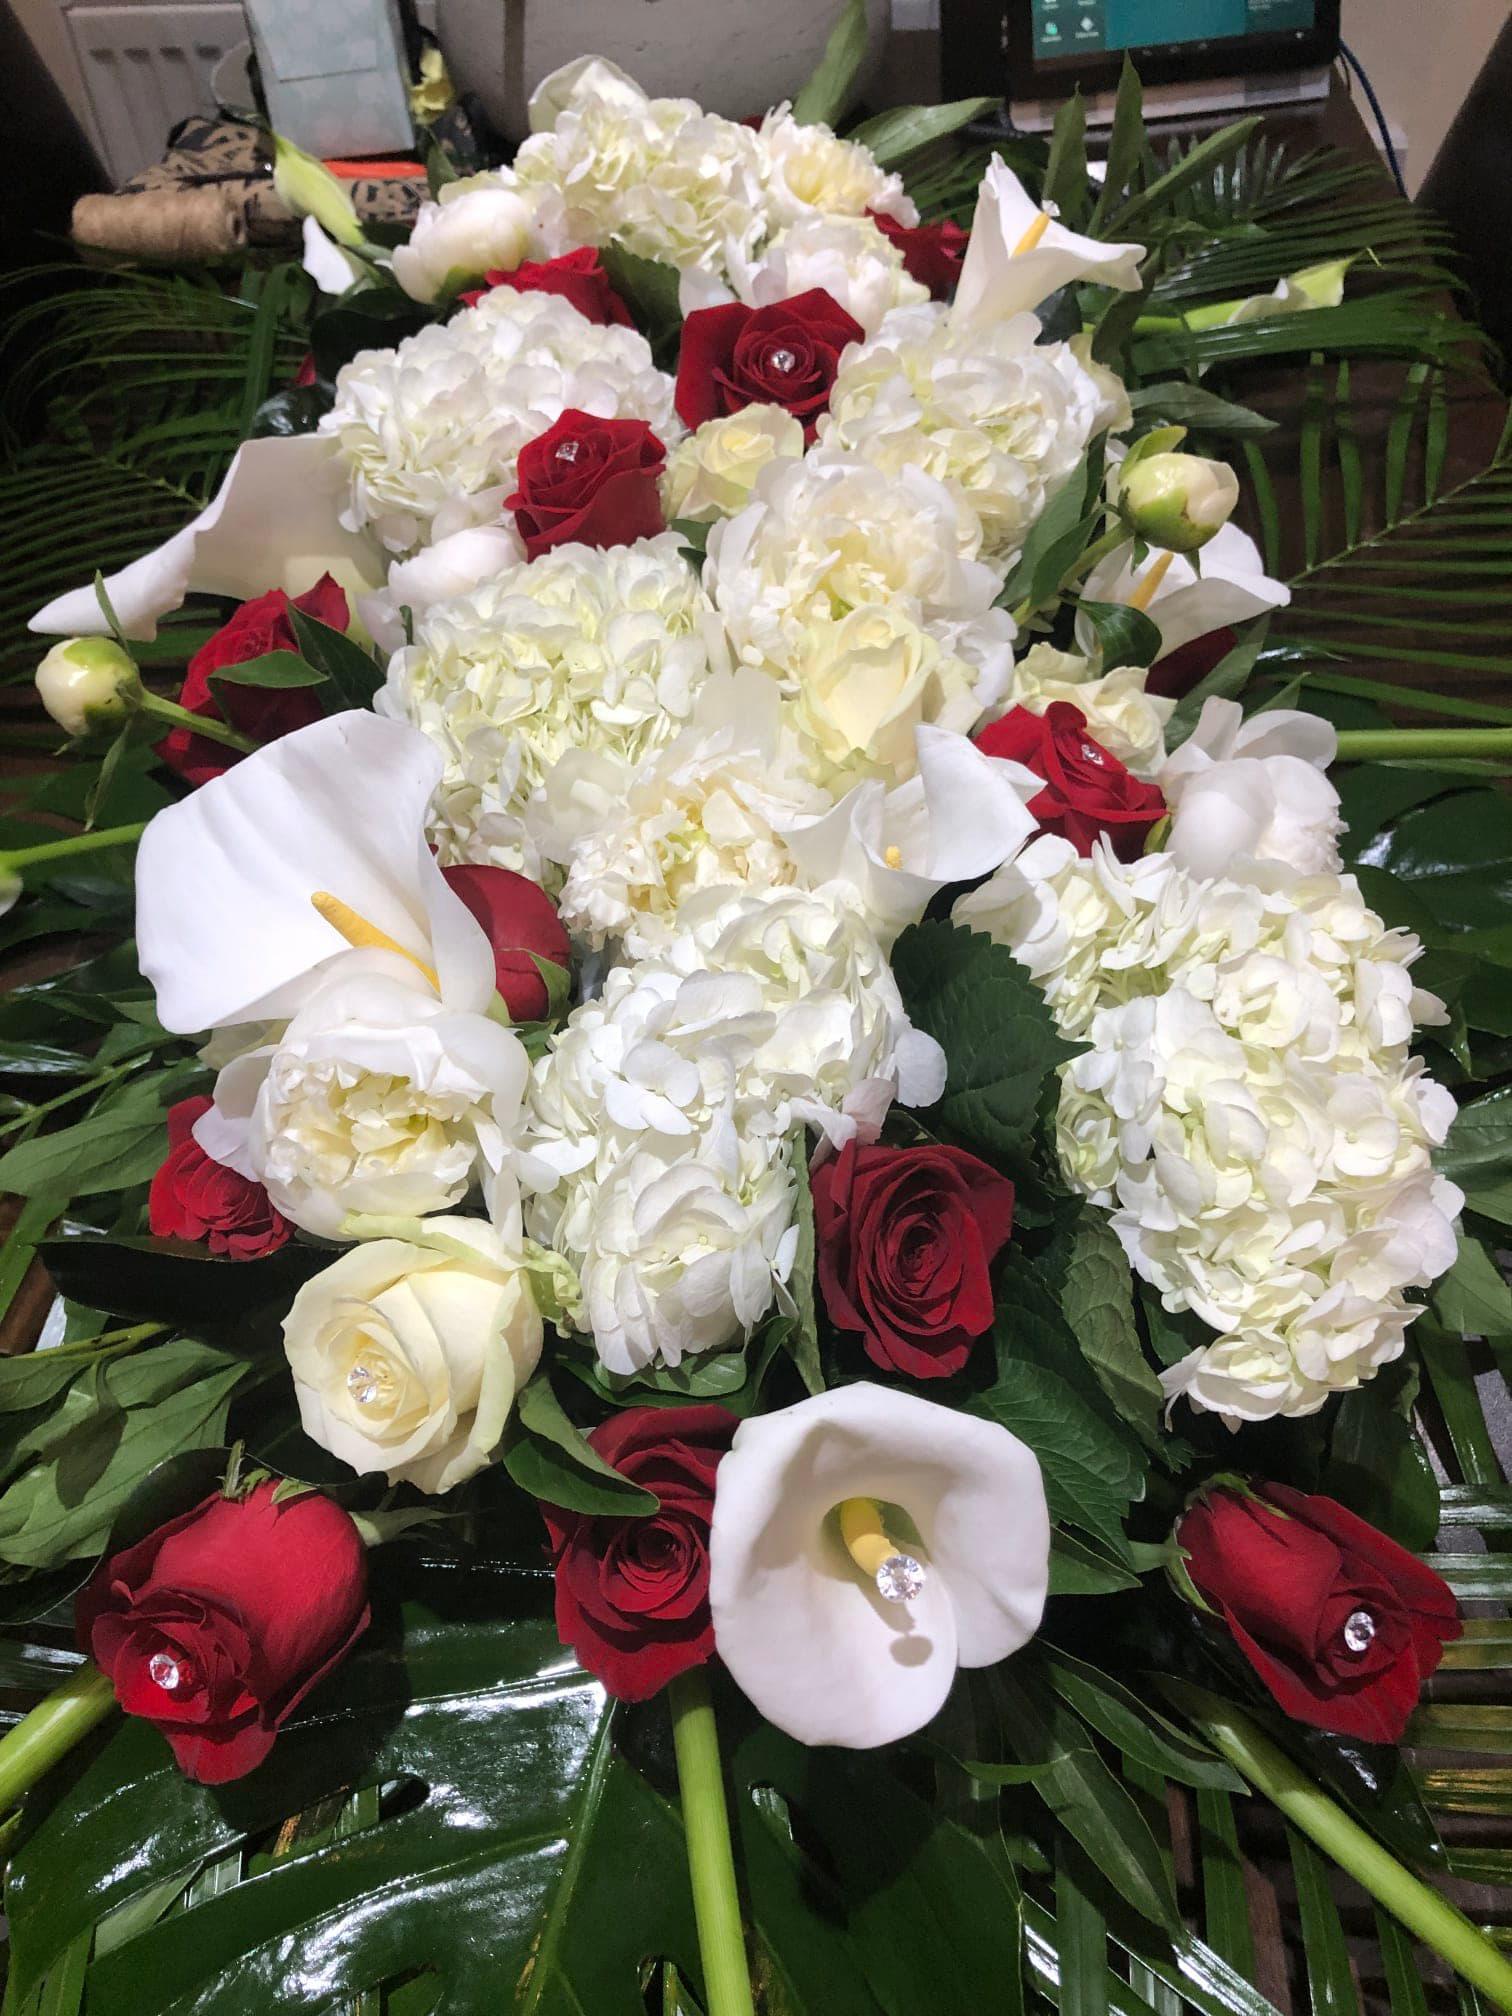 Personal Touch Funeral Planning Services London 020 7326 0860